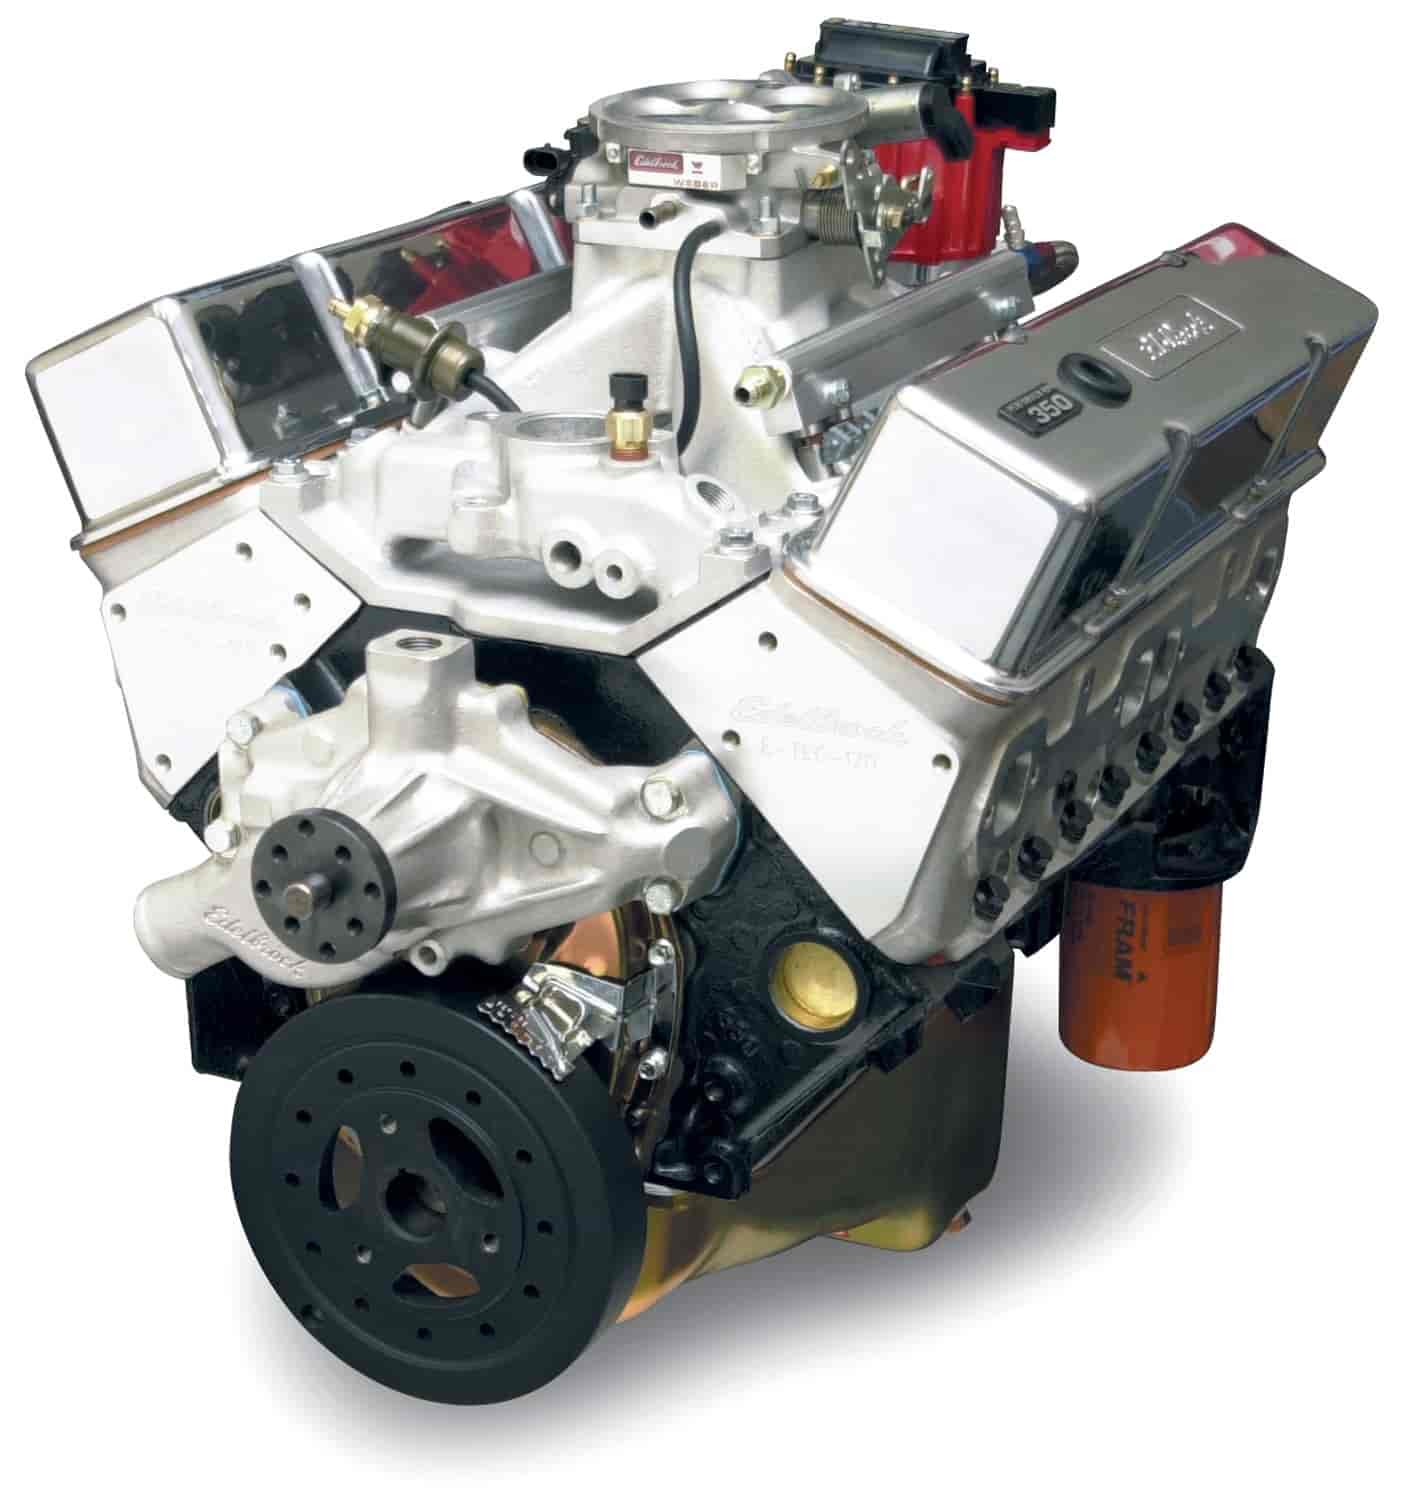 Performer RPM E-Tec Small Block Chevy 350ci / 440 hp Polished Crate Engine with RPM Air-Gap Intake & Pro-Flo 3 EFI